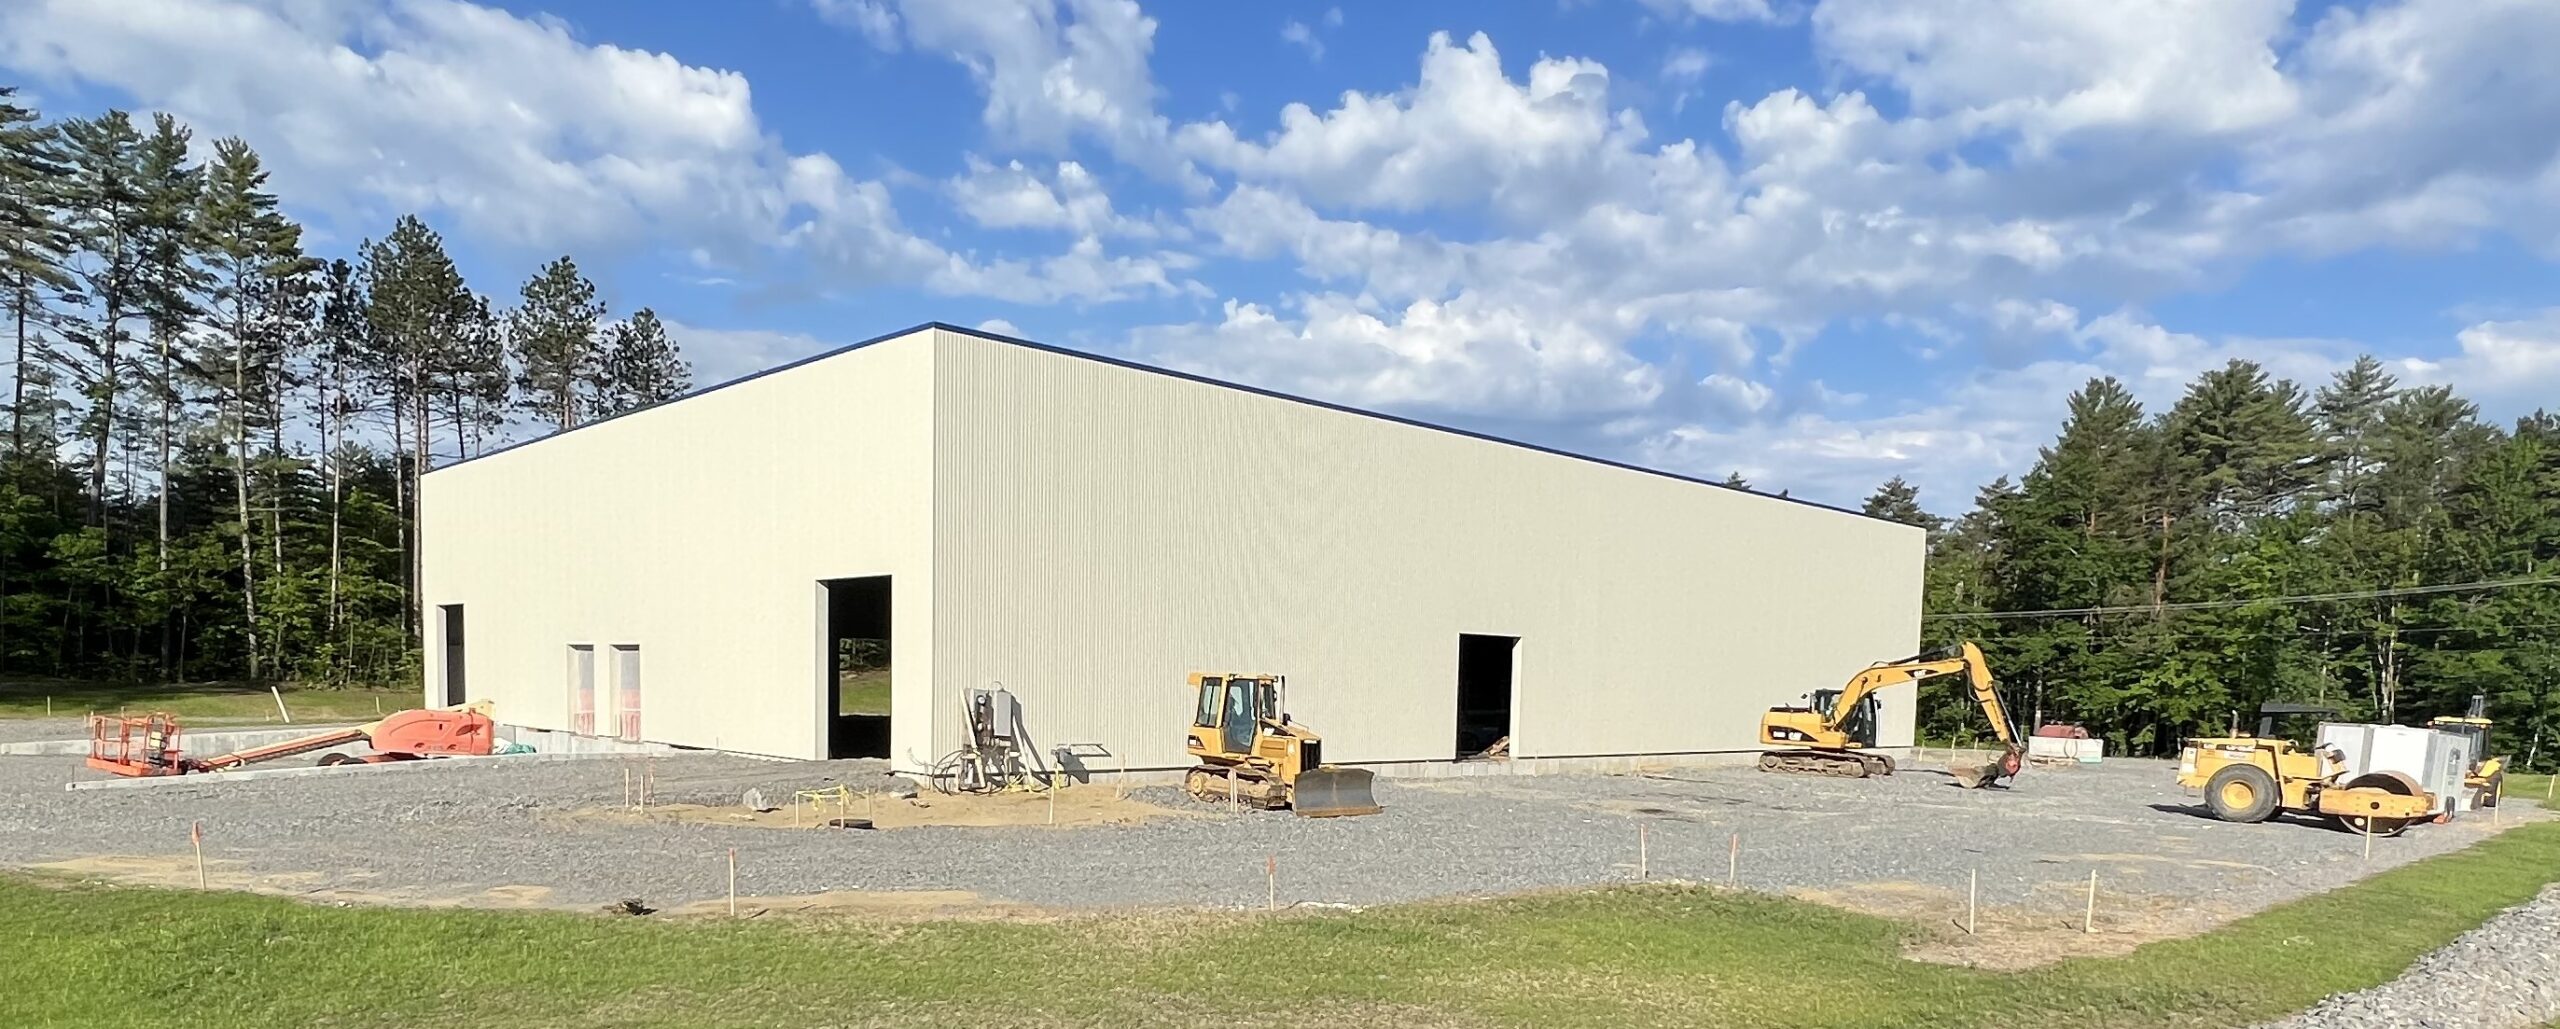 Construction being done on the new Manufacturing Facility for Vernal Biosciences